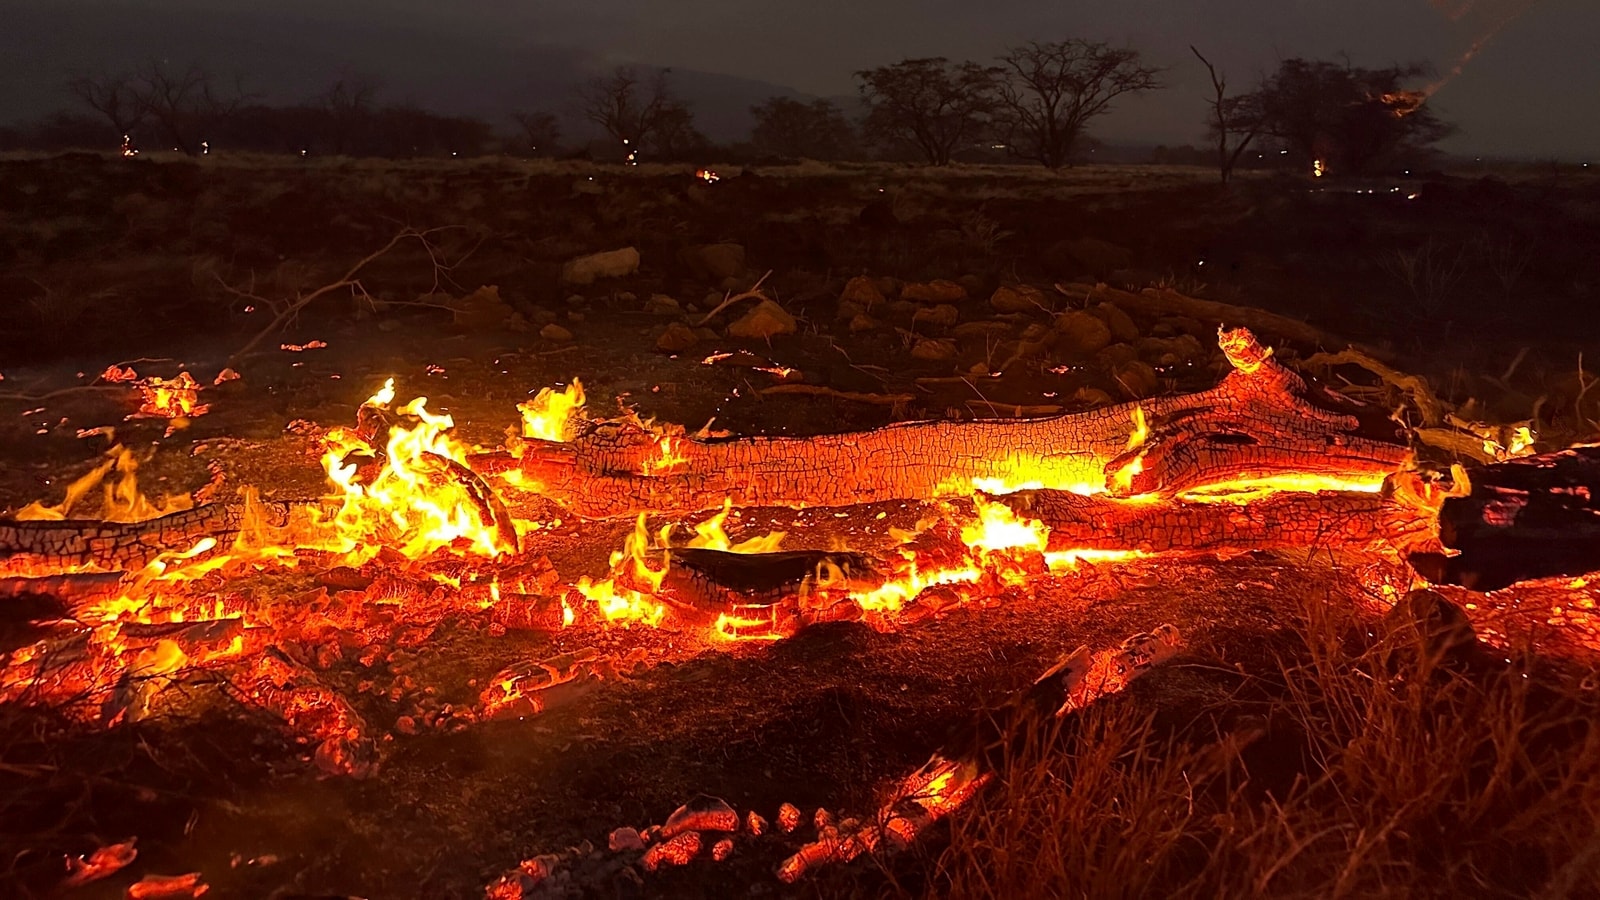 What caused the wildfire in Maui, Hawaii, that killed 36 people and